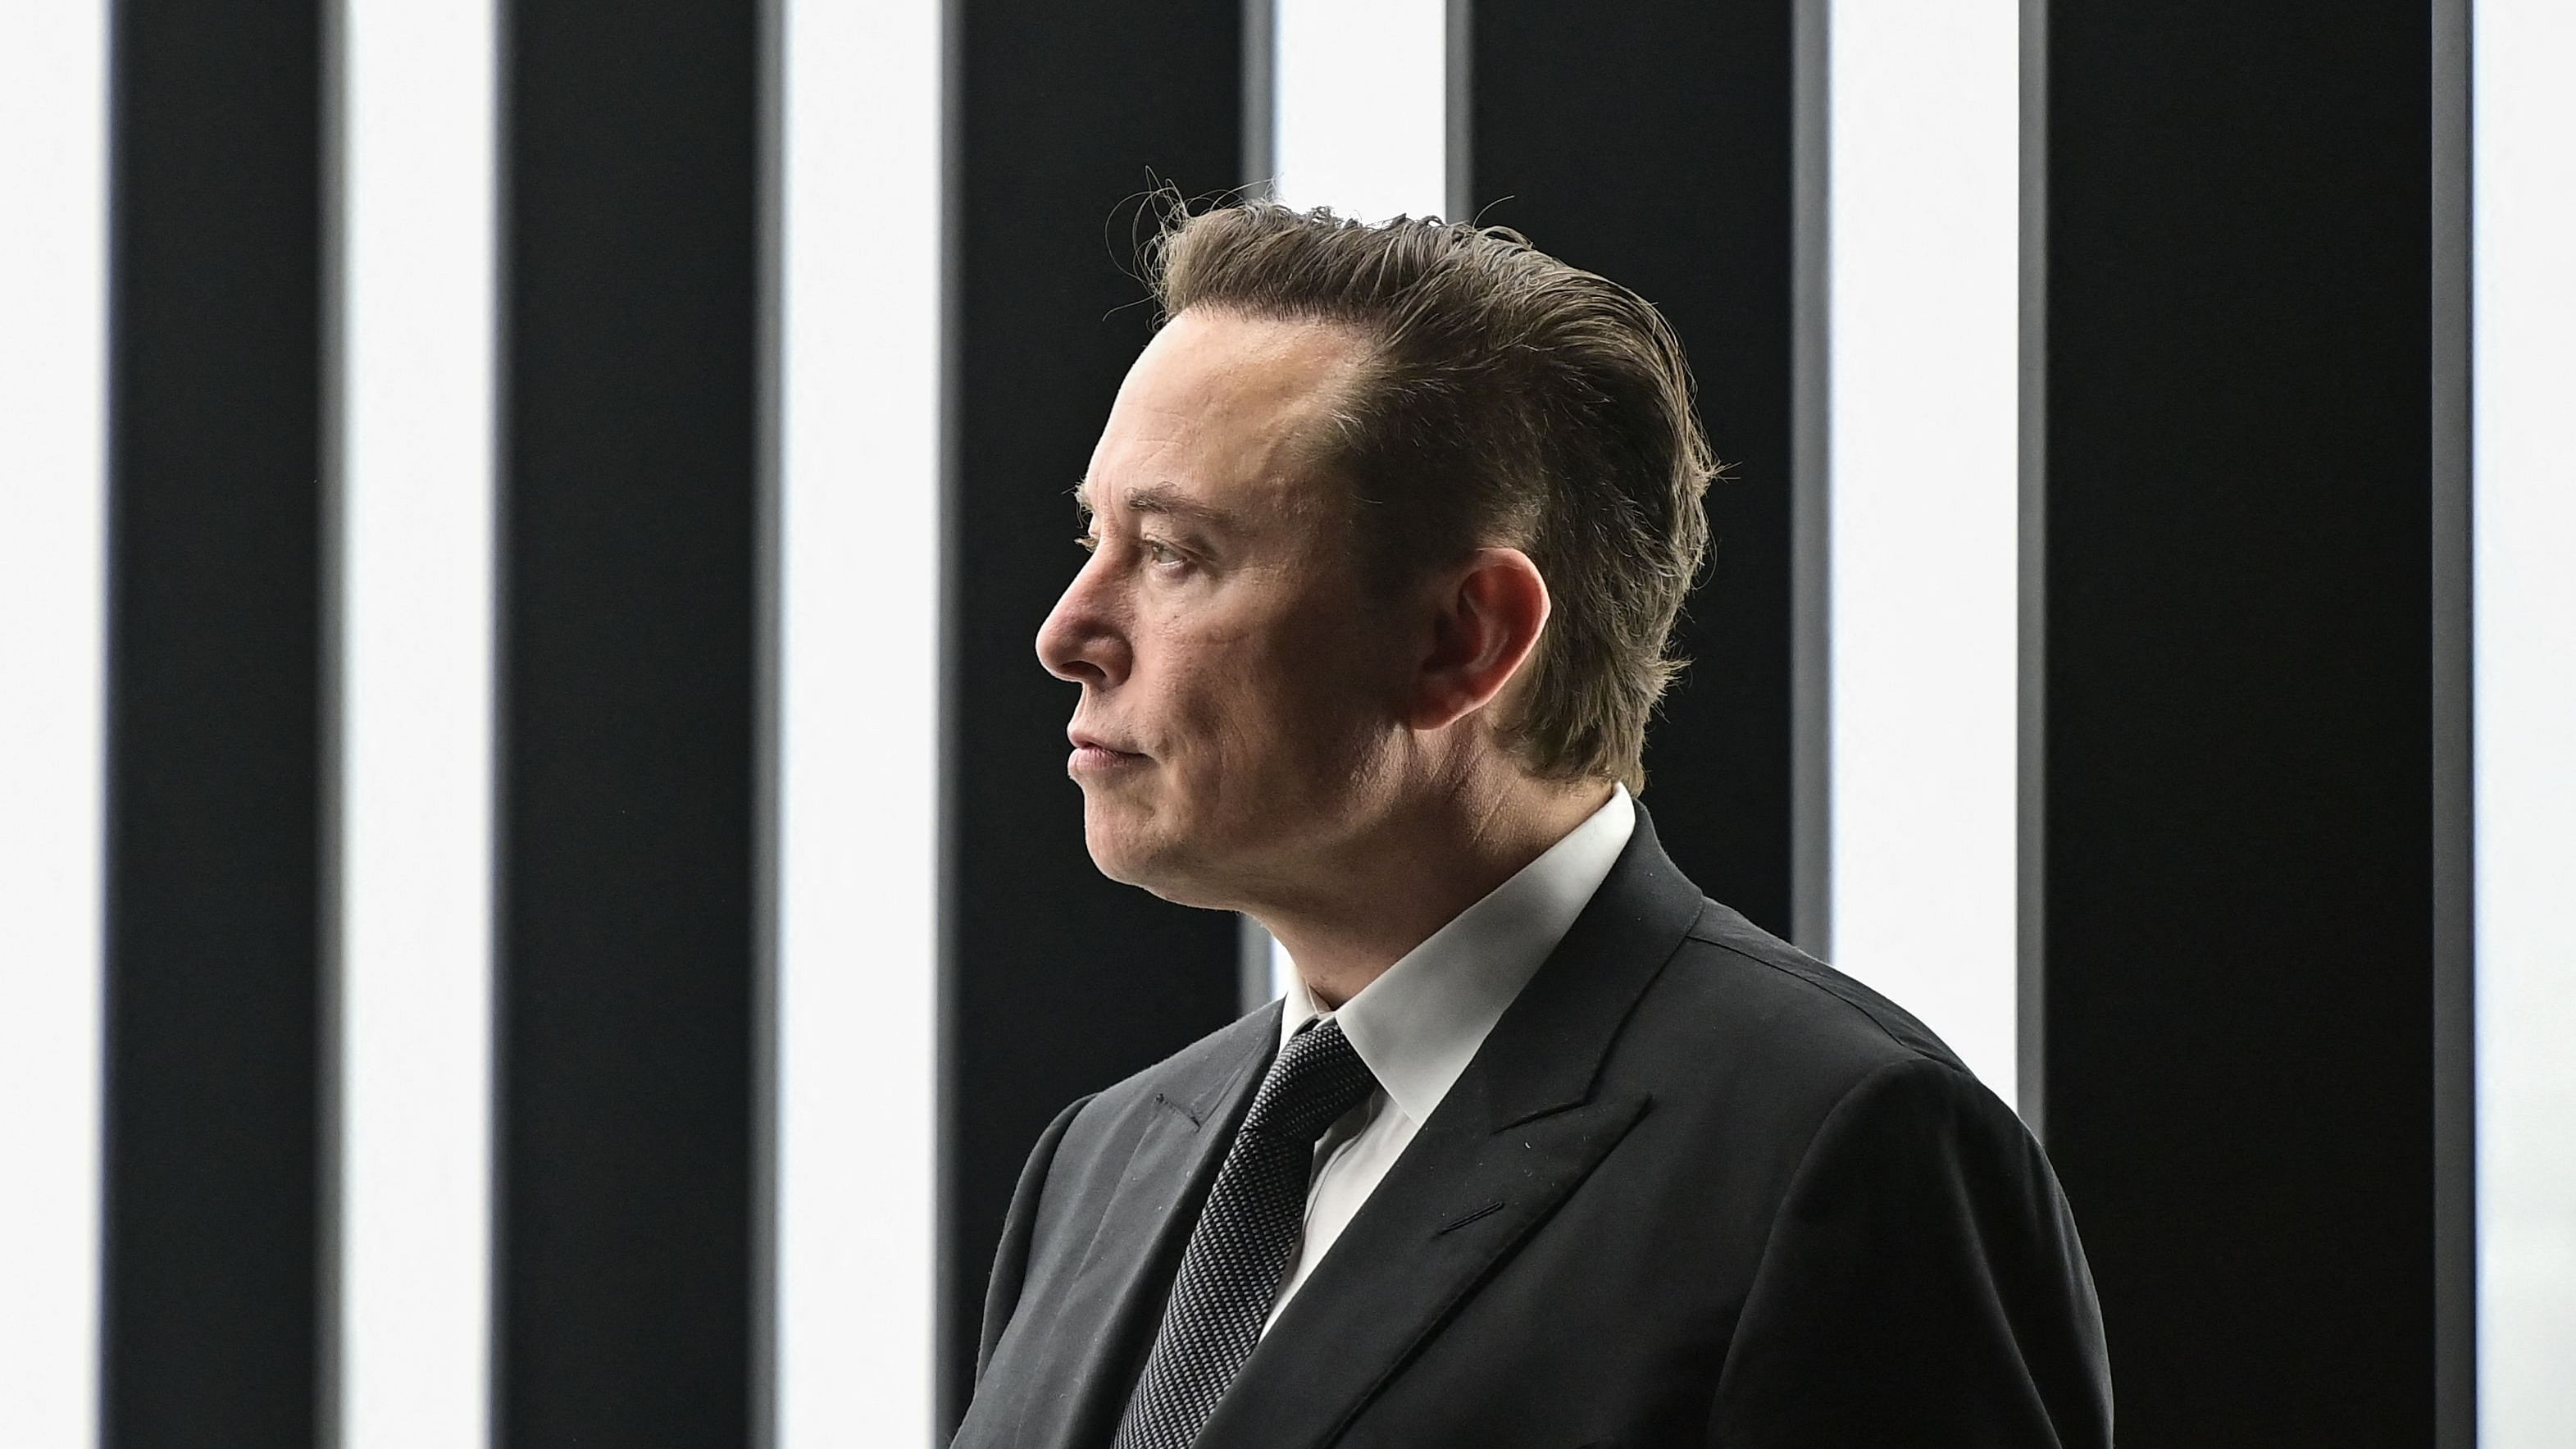 After complaining about thepublication’s paywall, Musk asked how much it would cost to just buy New Scientist outright. Credit: AFP Photo